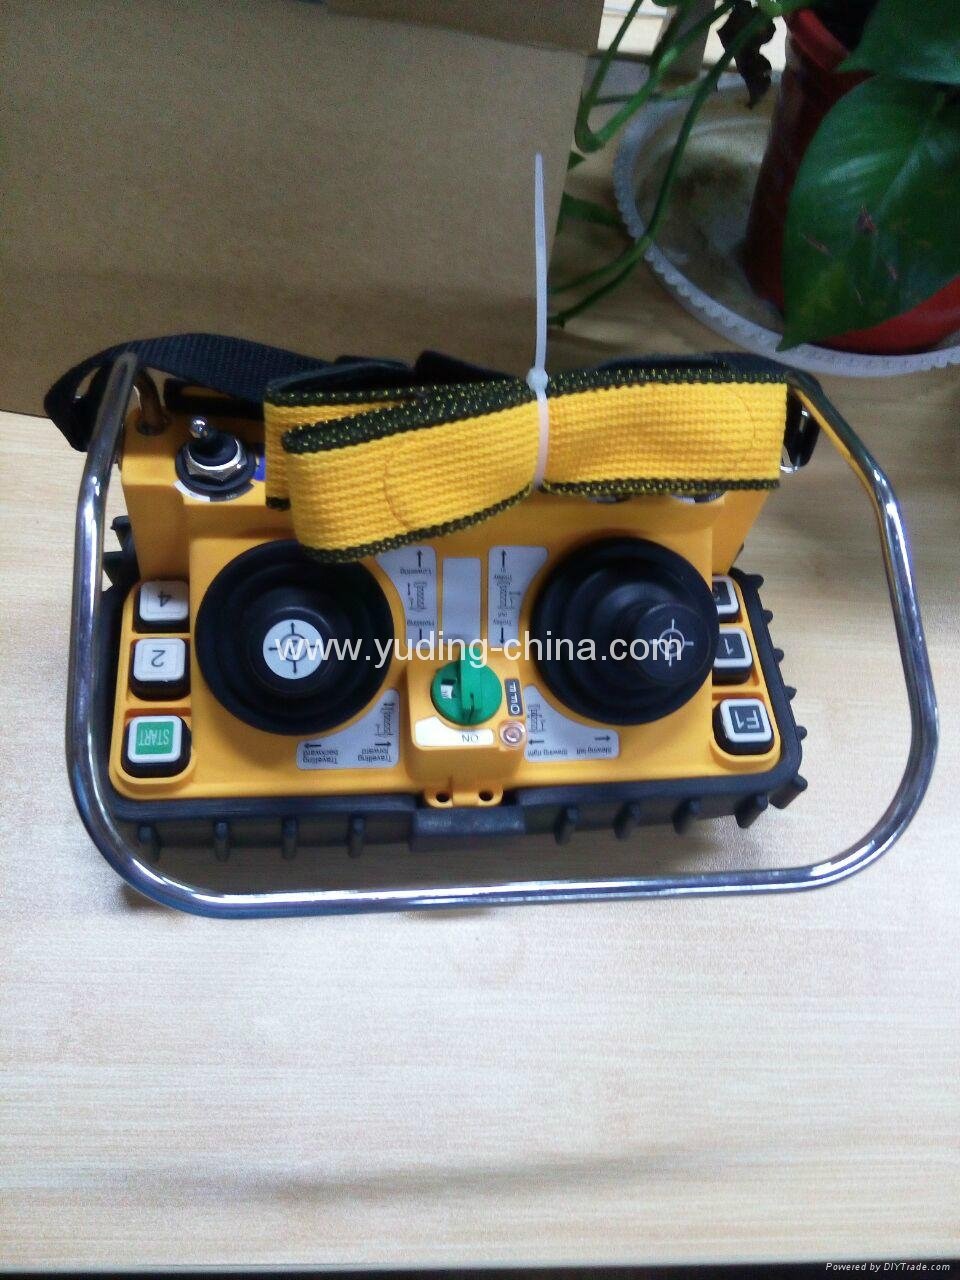 Industrial crane Wireless Joystick remote control with transmitter and receiver 